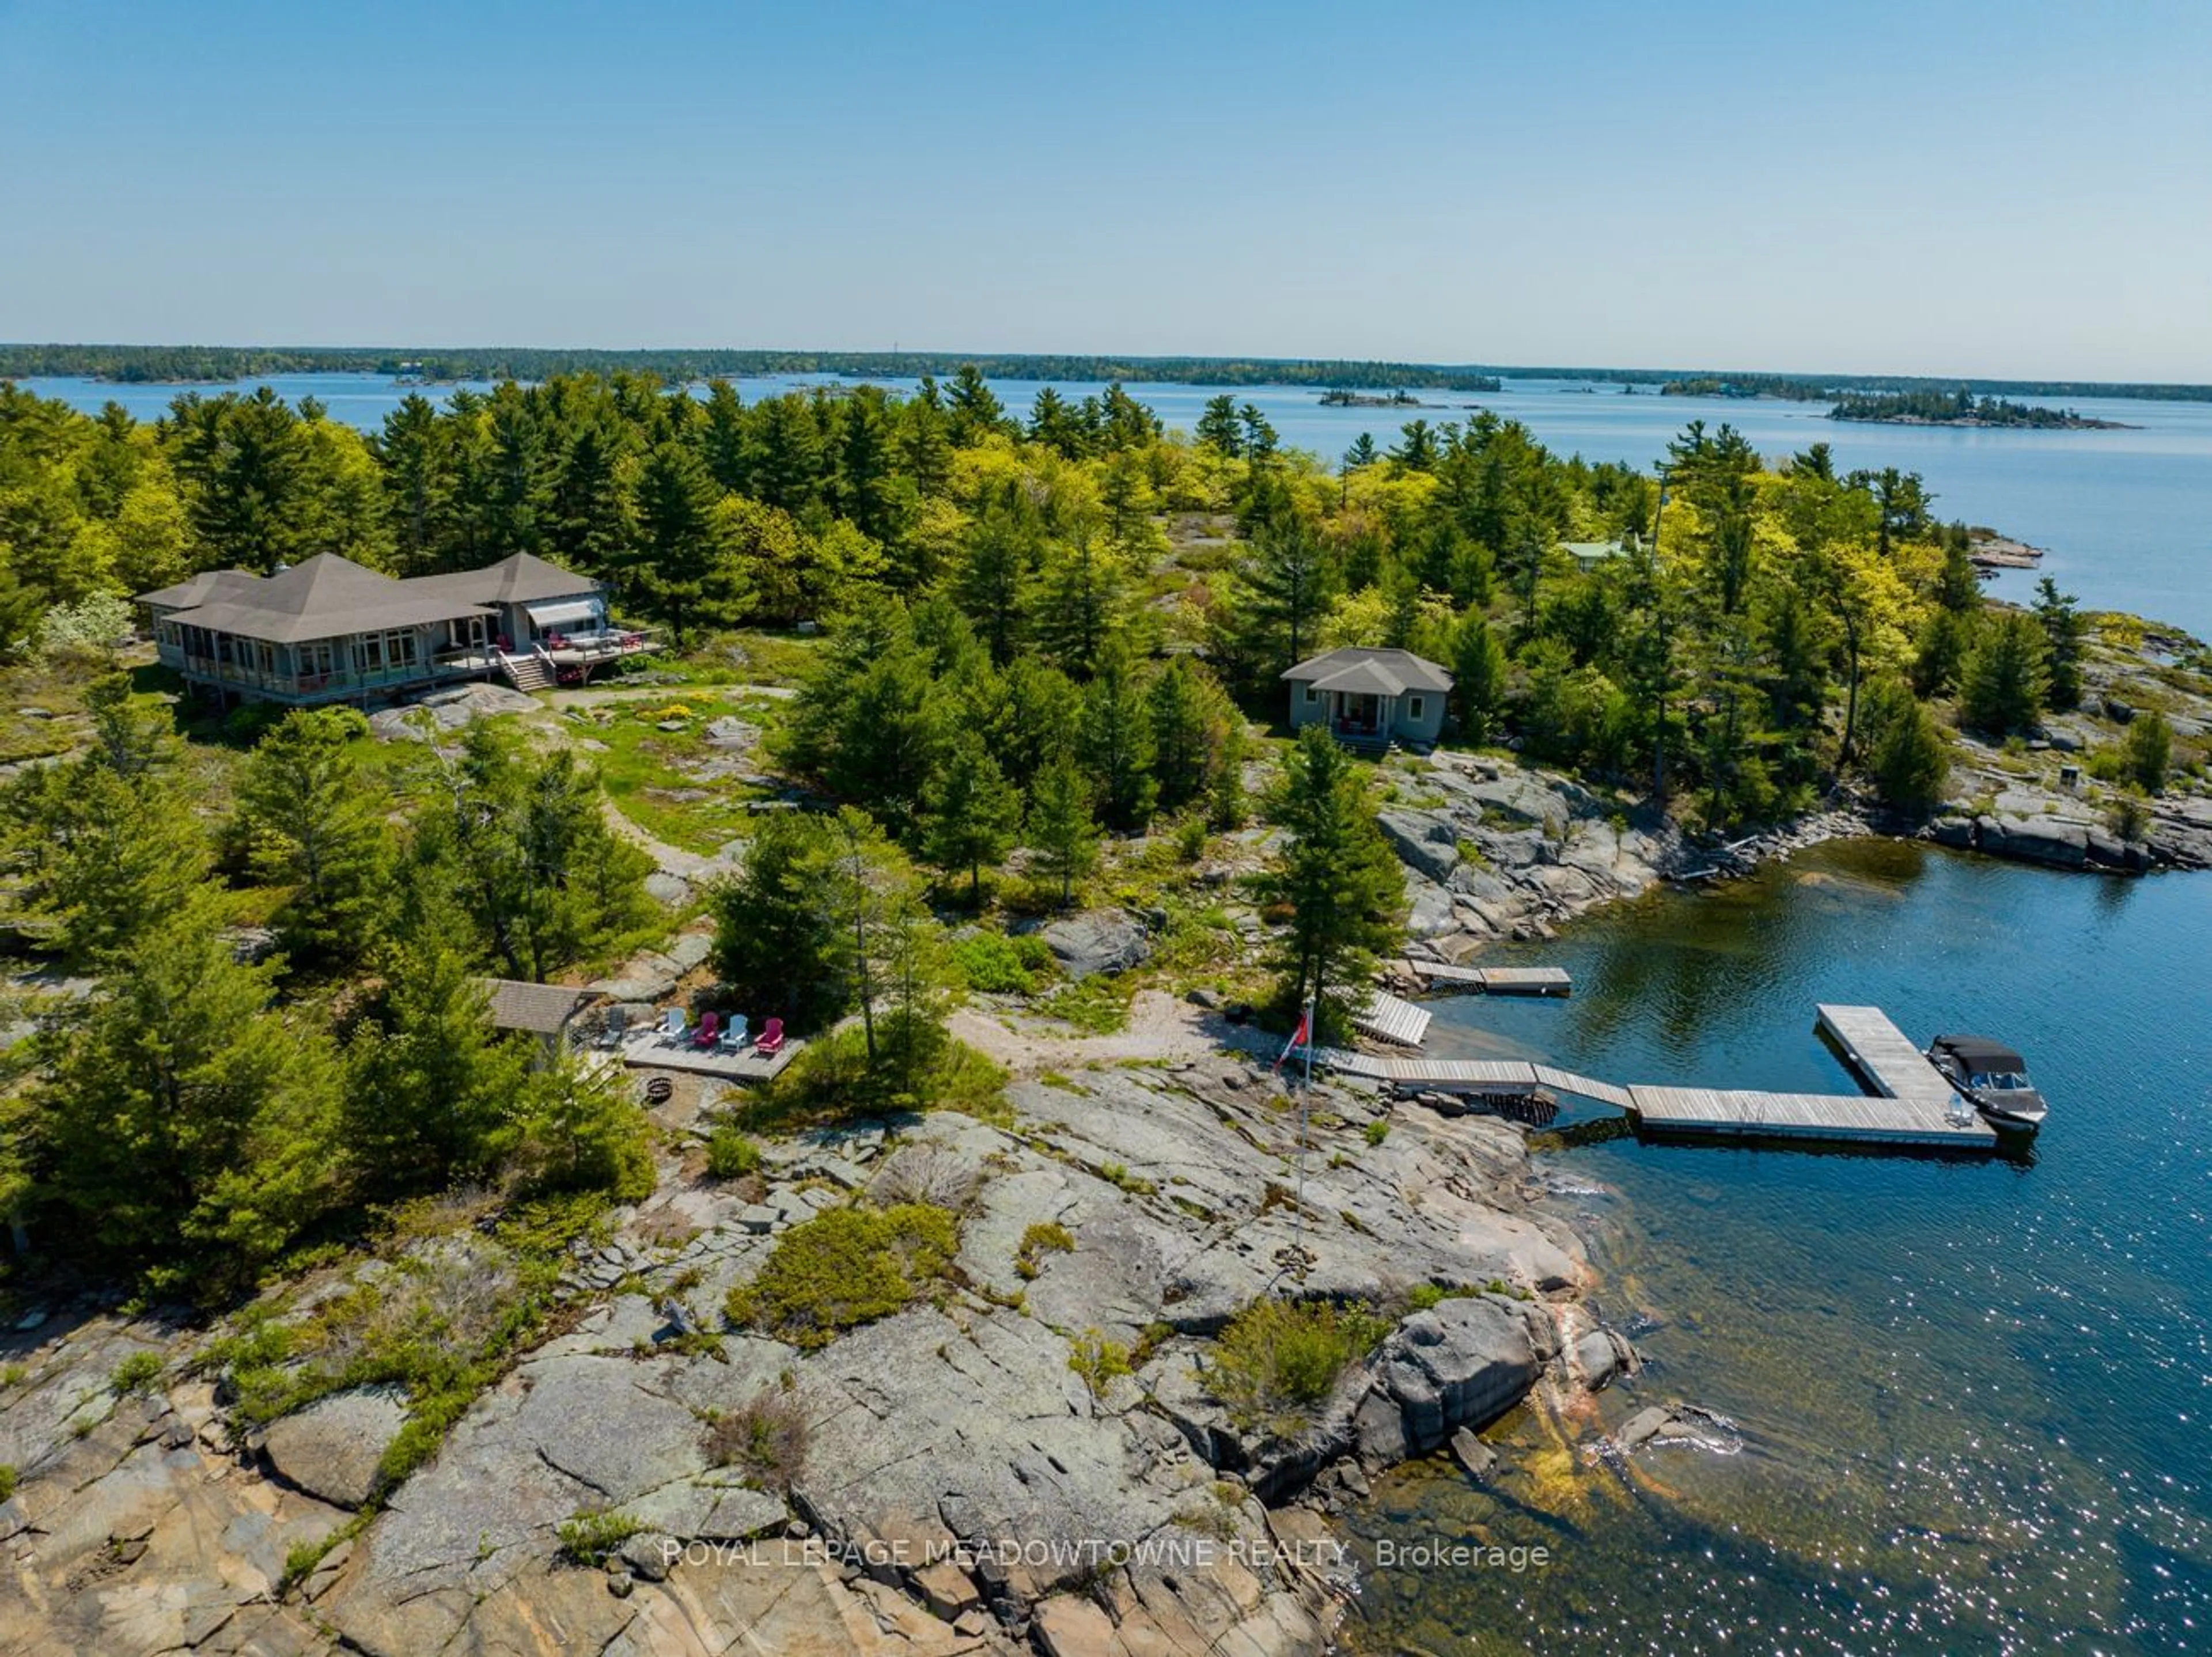 Lakeview for 65 B321 Pt. Frying Pan Island, The Archipelago Ontario P2A 1T4